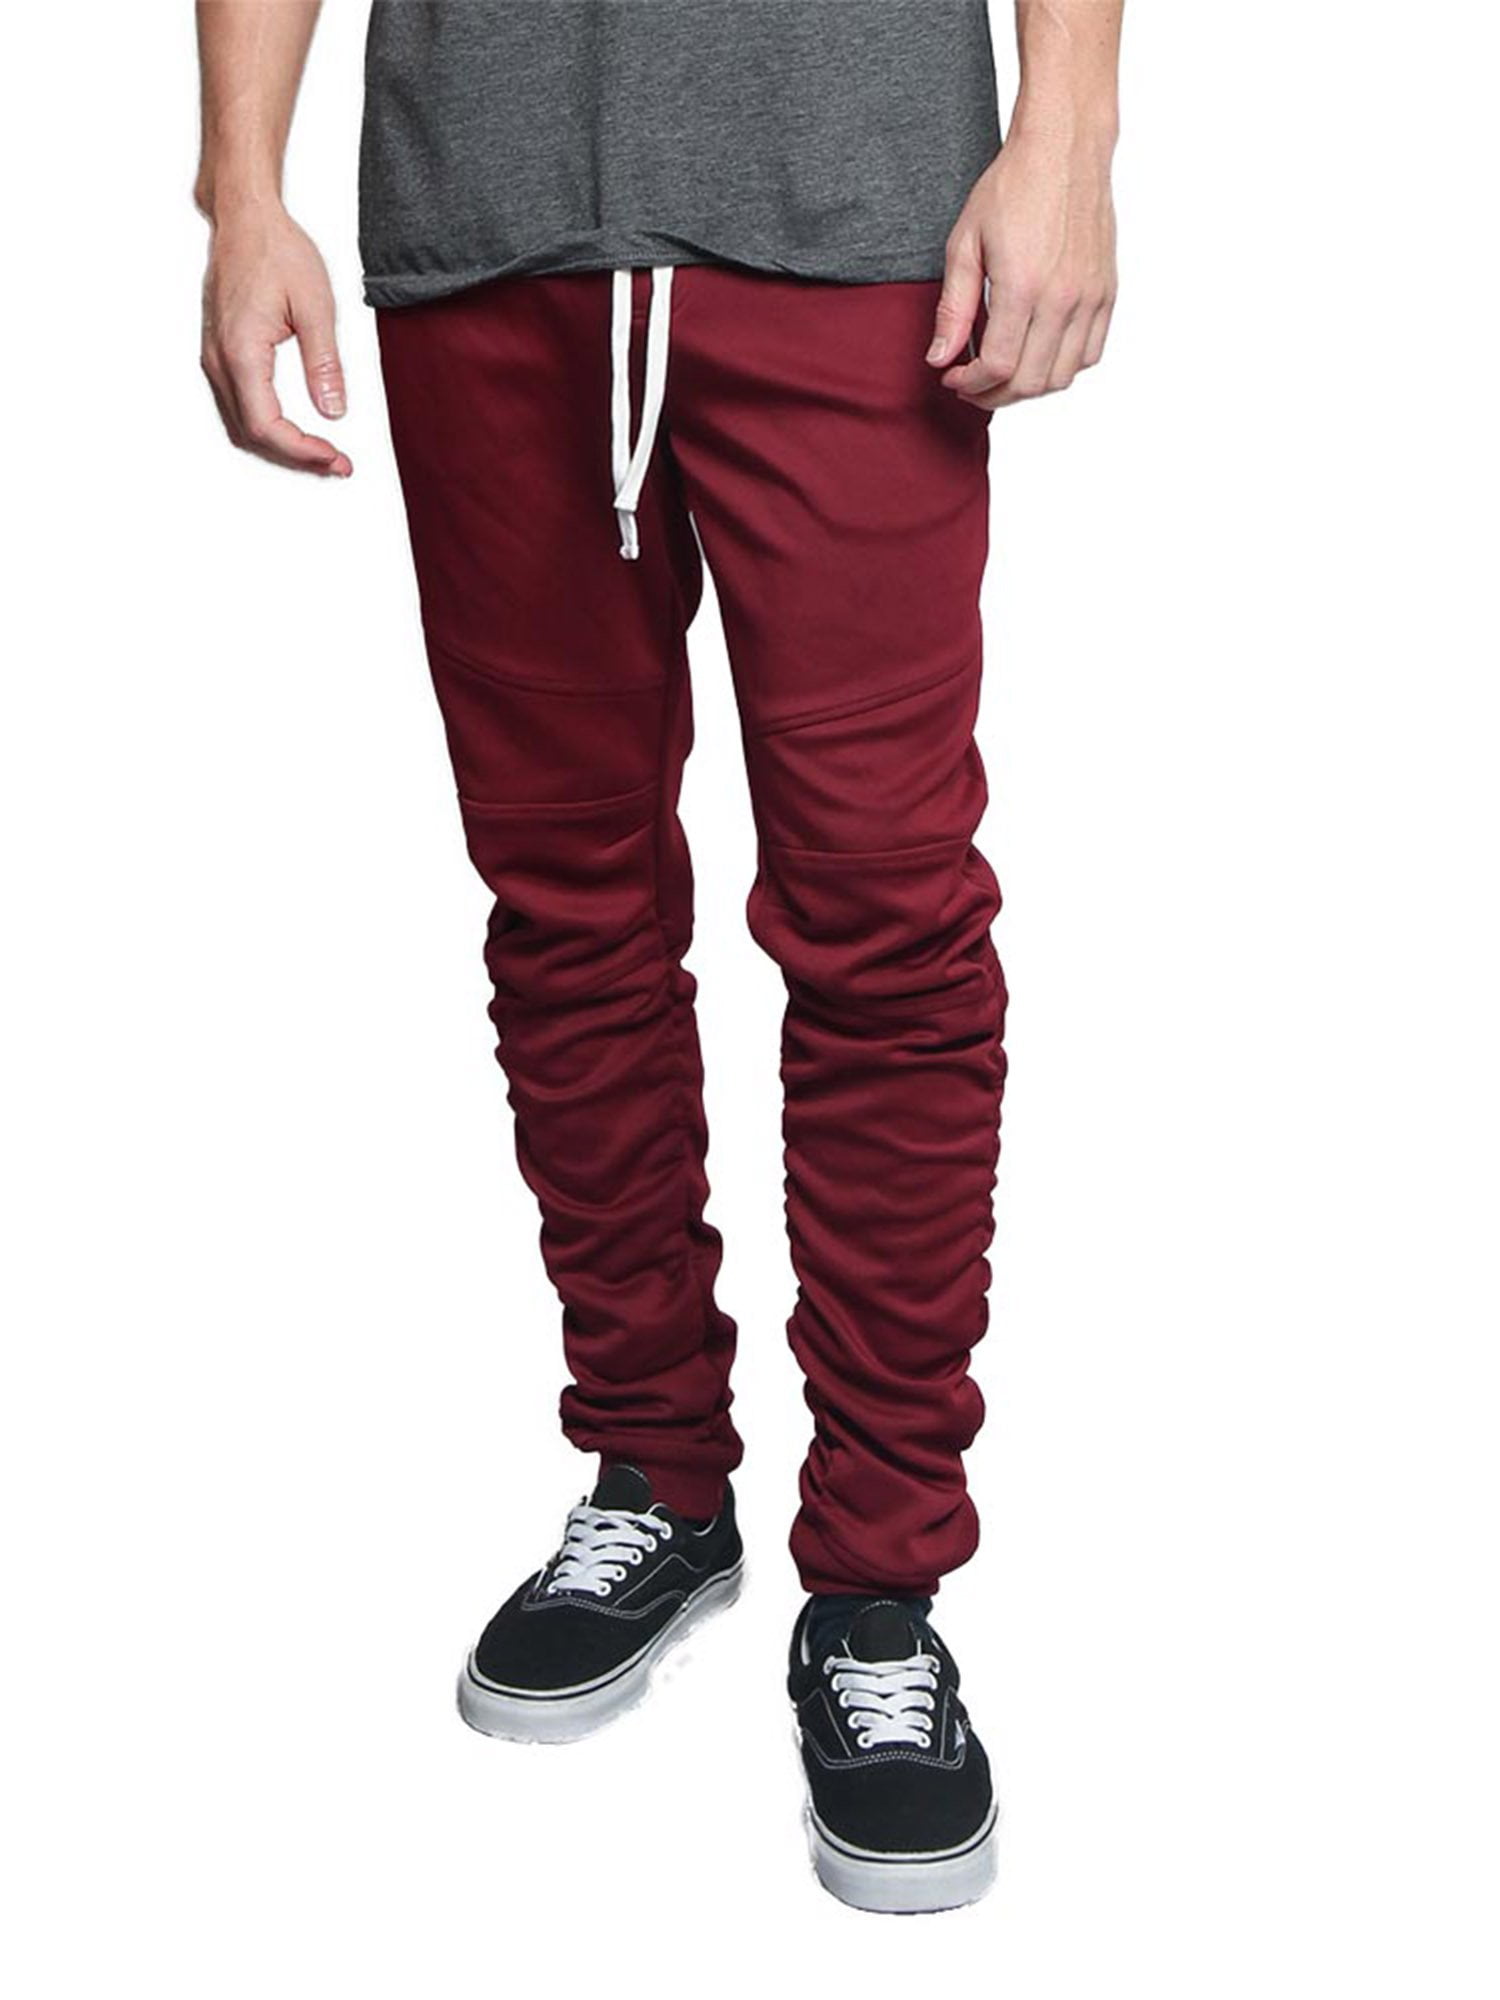 Buy Cotton Maroon Track pants for Women online in India - Cupidclothings –  Cupid Clothings